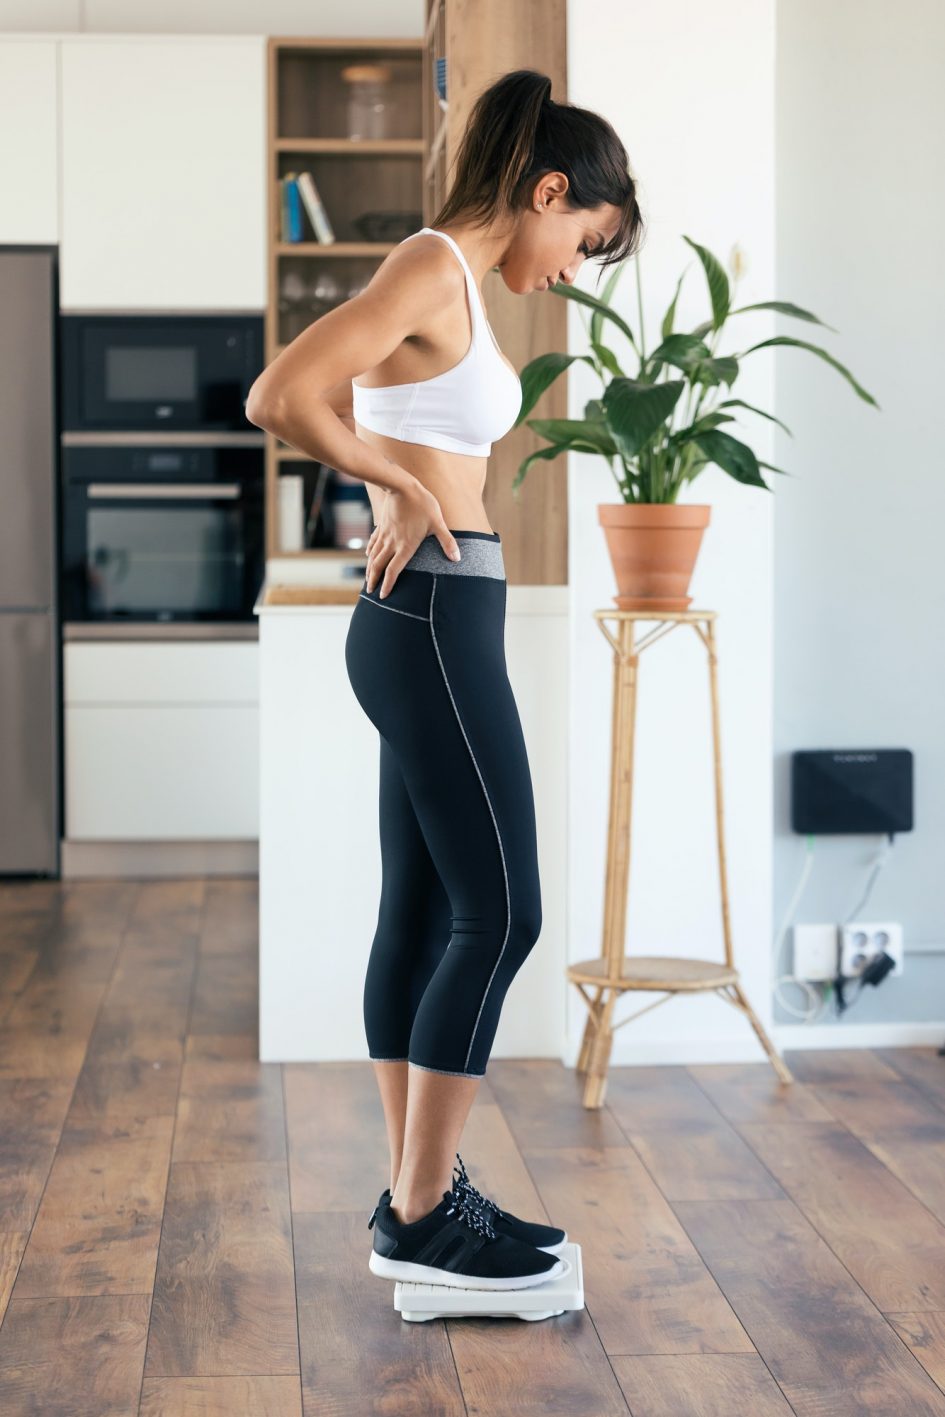 Healthy young woman looking if she has lost weight on scale weight at home.